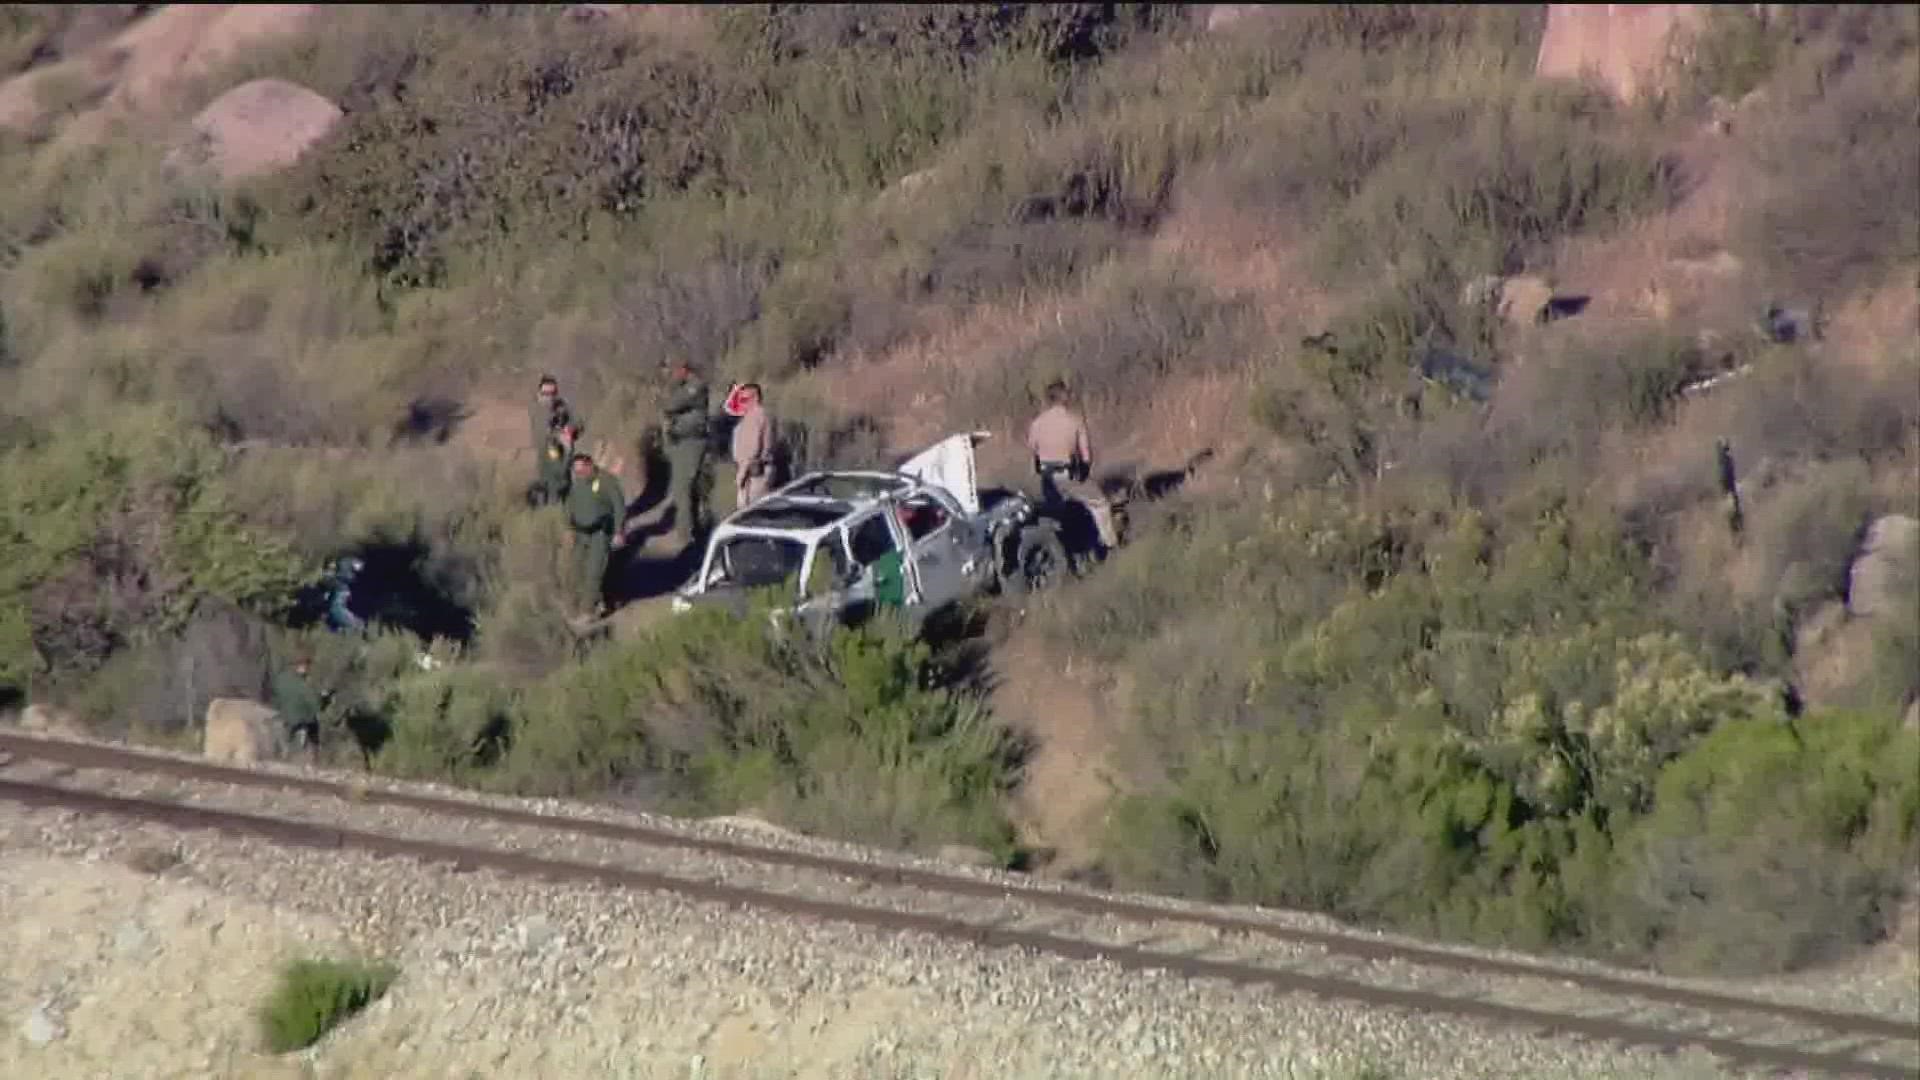 The agent was thrown from the vehicle before being found by another agent, according to a Border Patrol spokesperson.